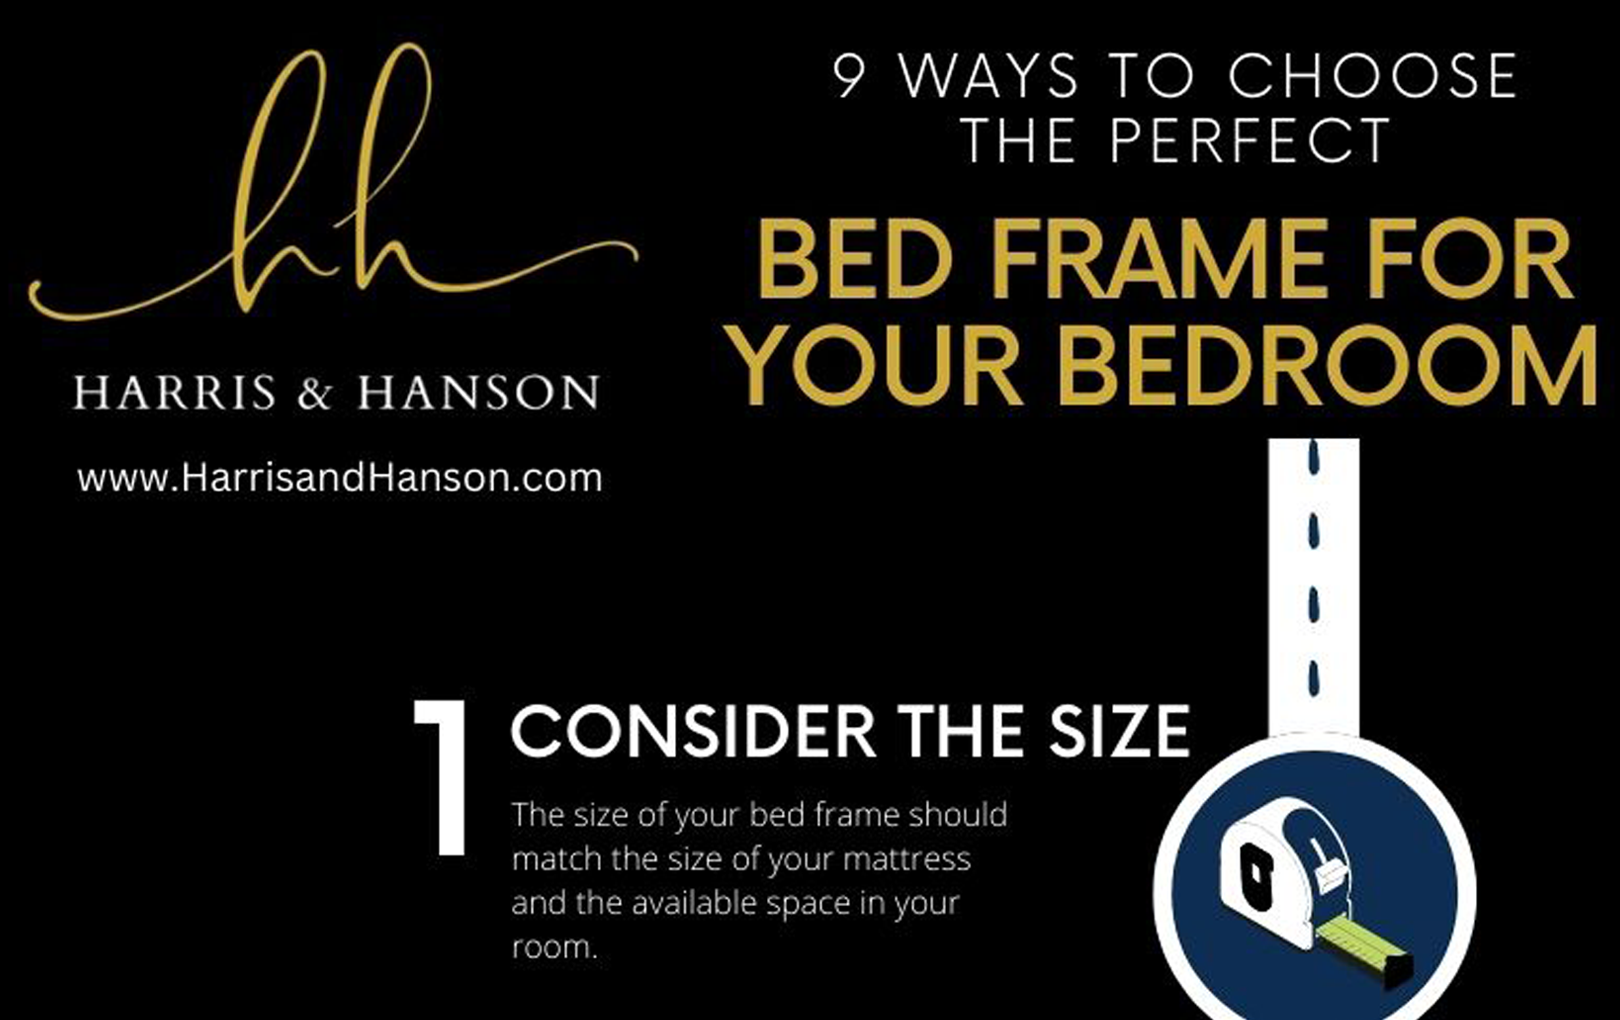 9 ways to choose your perfect bed frame for your bedroom